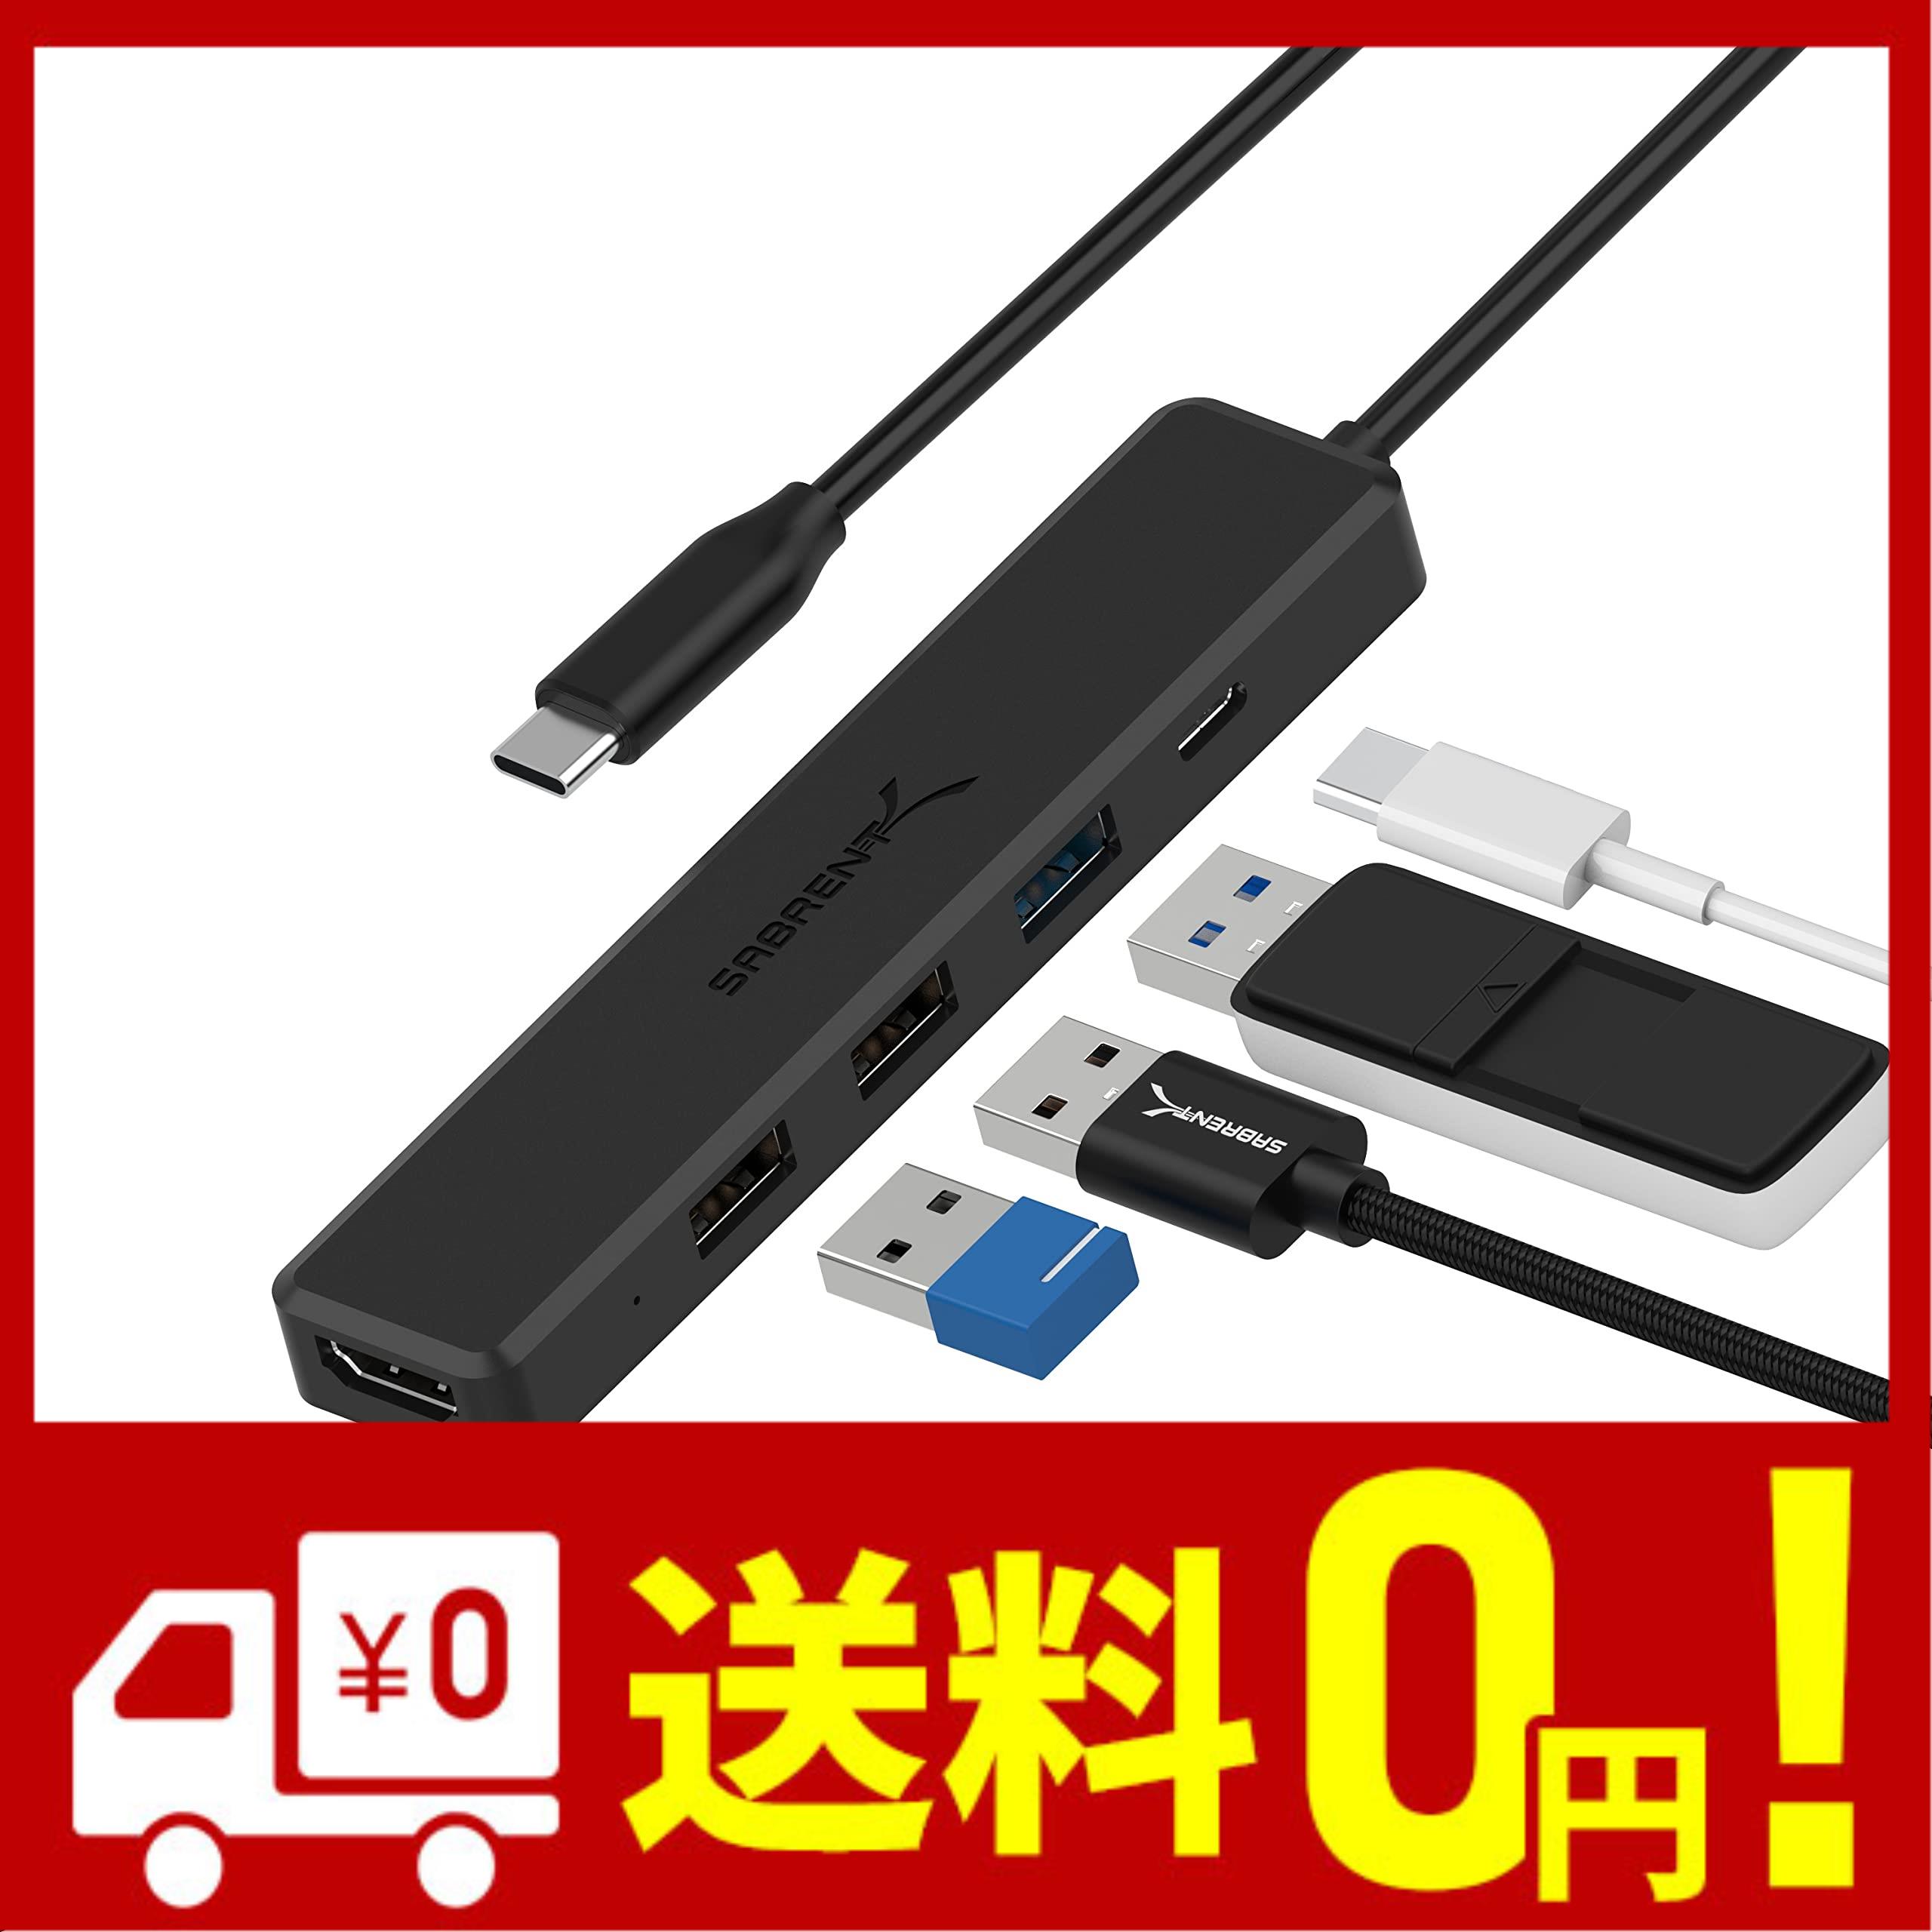 SABRENT usb-cハブ 5ポート 4K HDMI搭載 Type-Cポート Power Delivery 60ワット USB 3.2 Gen 1ポート USB2ポート PS5 PS4 ノートパソコ